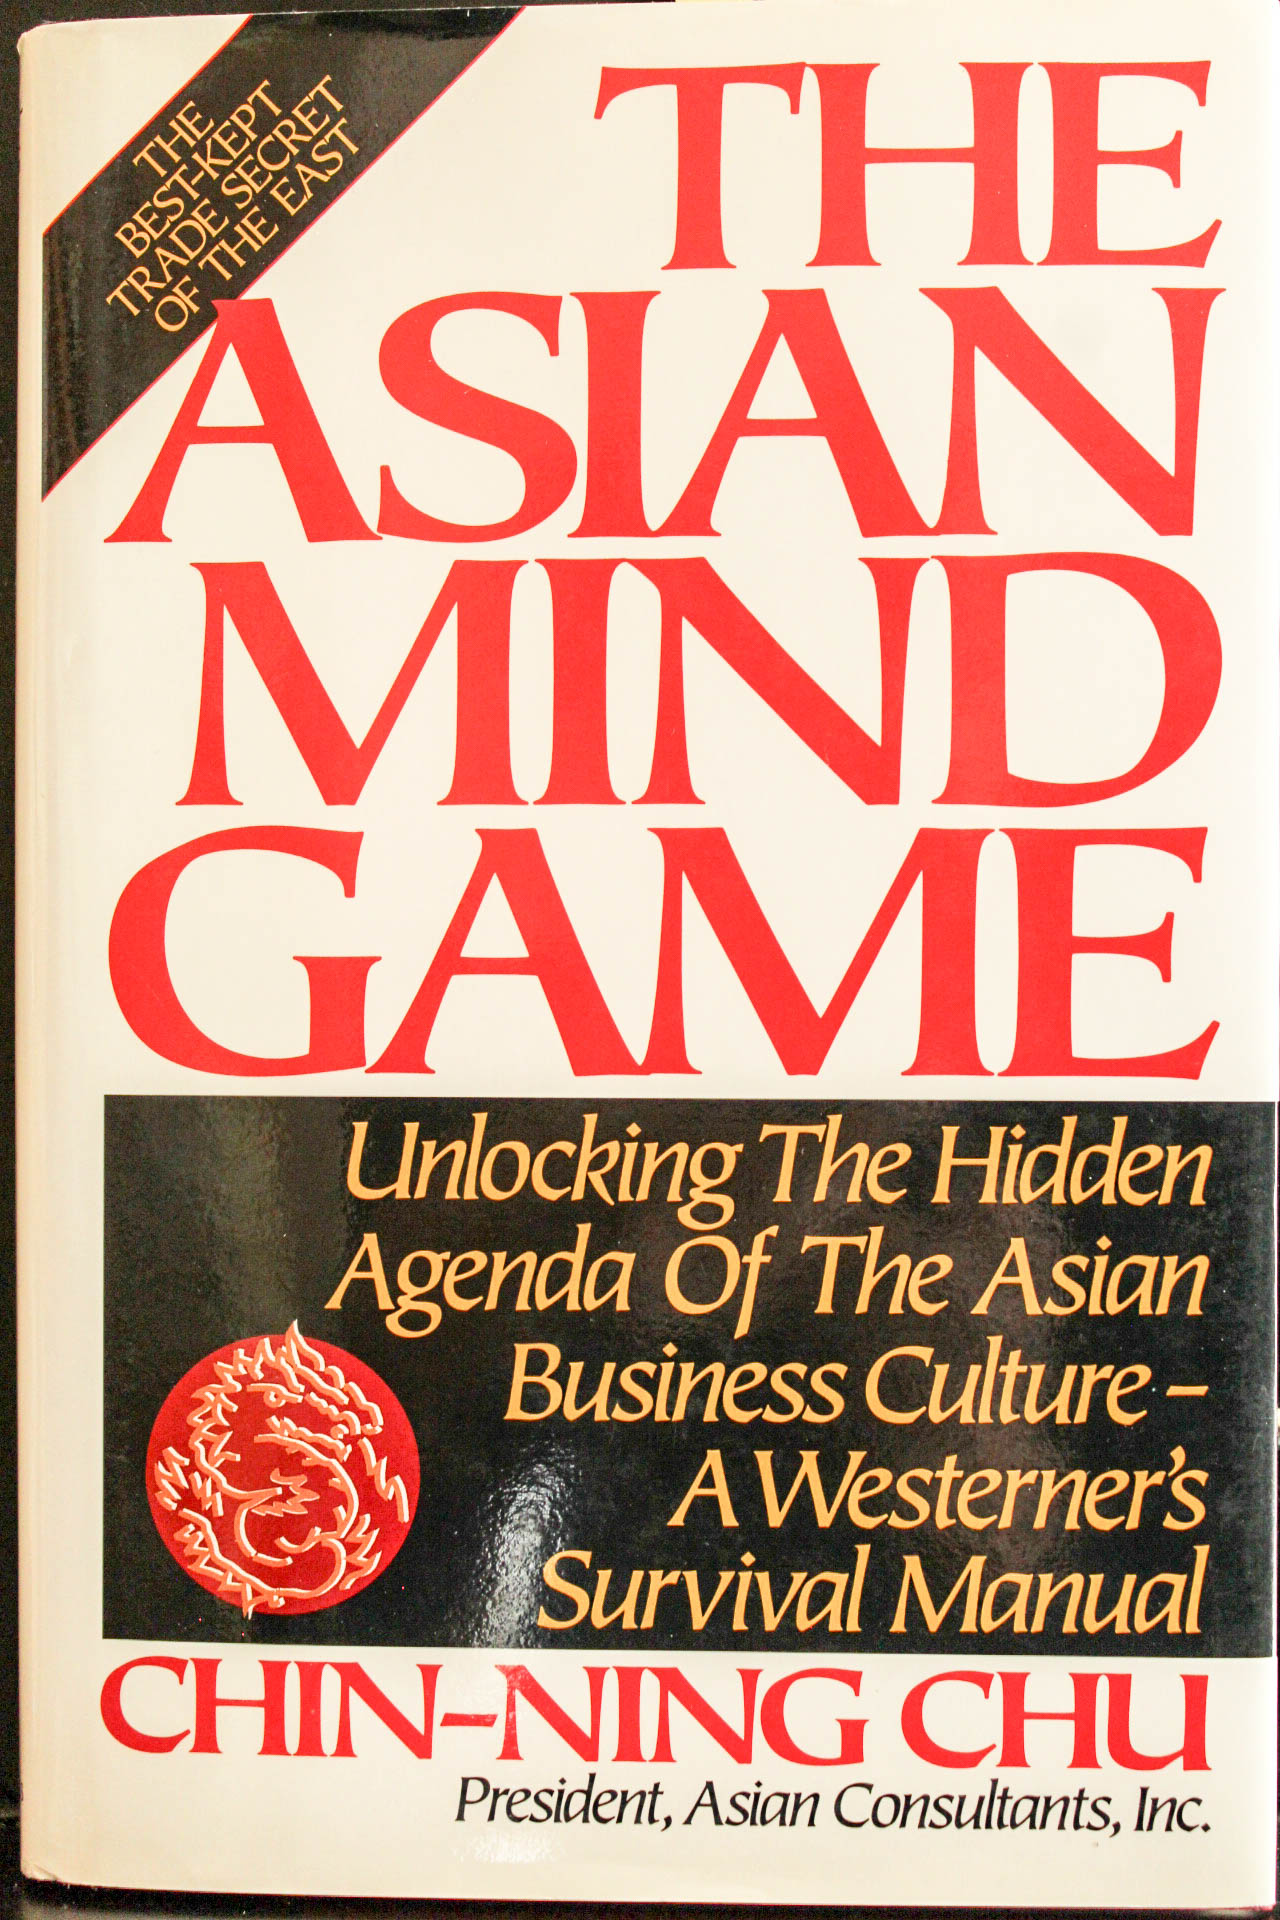 The Asian Mind Game: Unlocking the Hidden Agenda of the Asian Business Culture - A Westerner's Survival Manual - Chu, Chin-ning